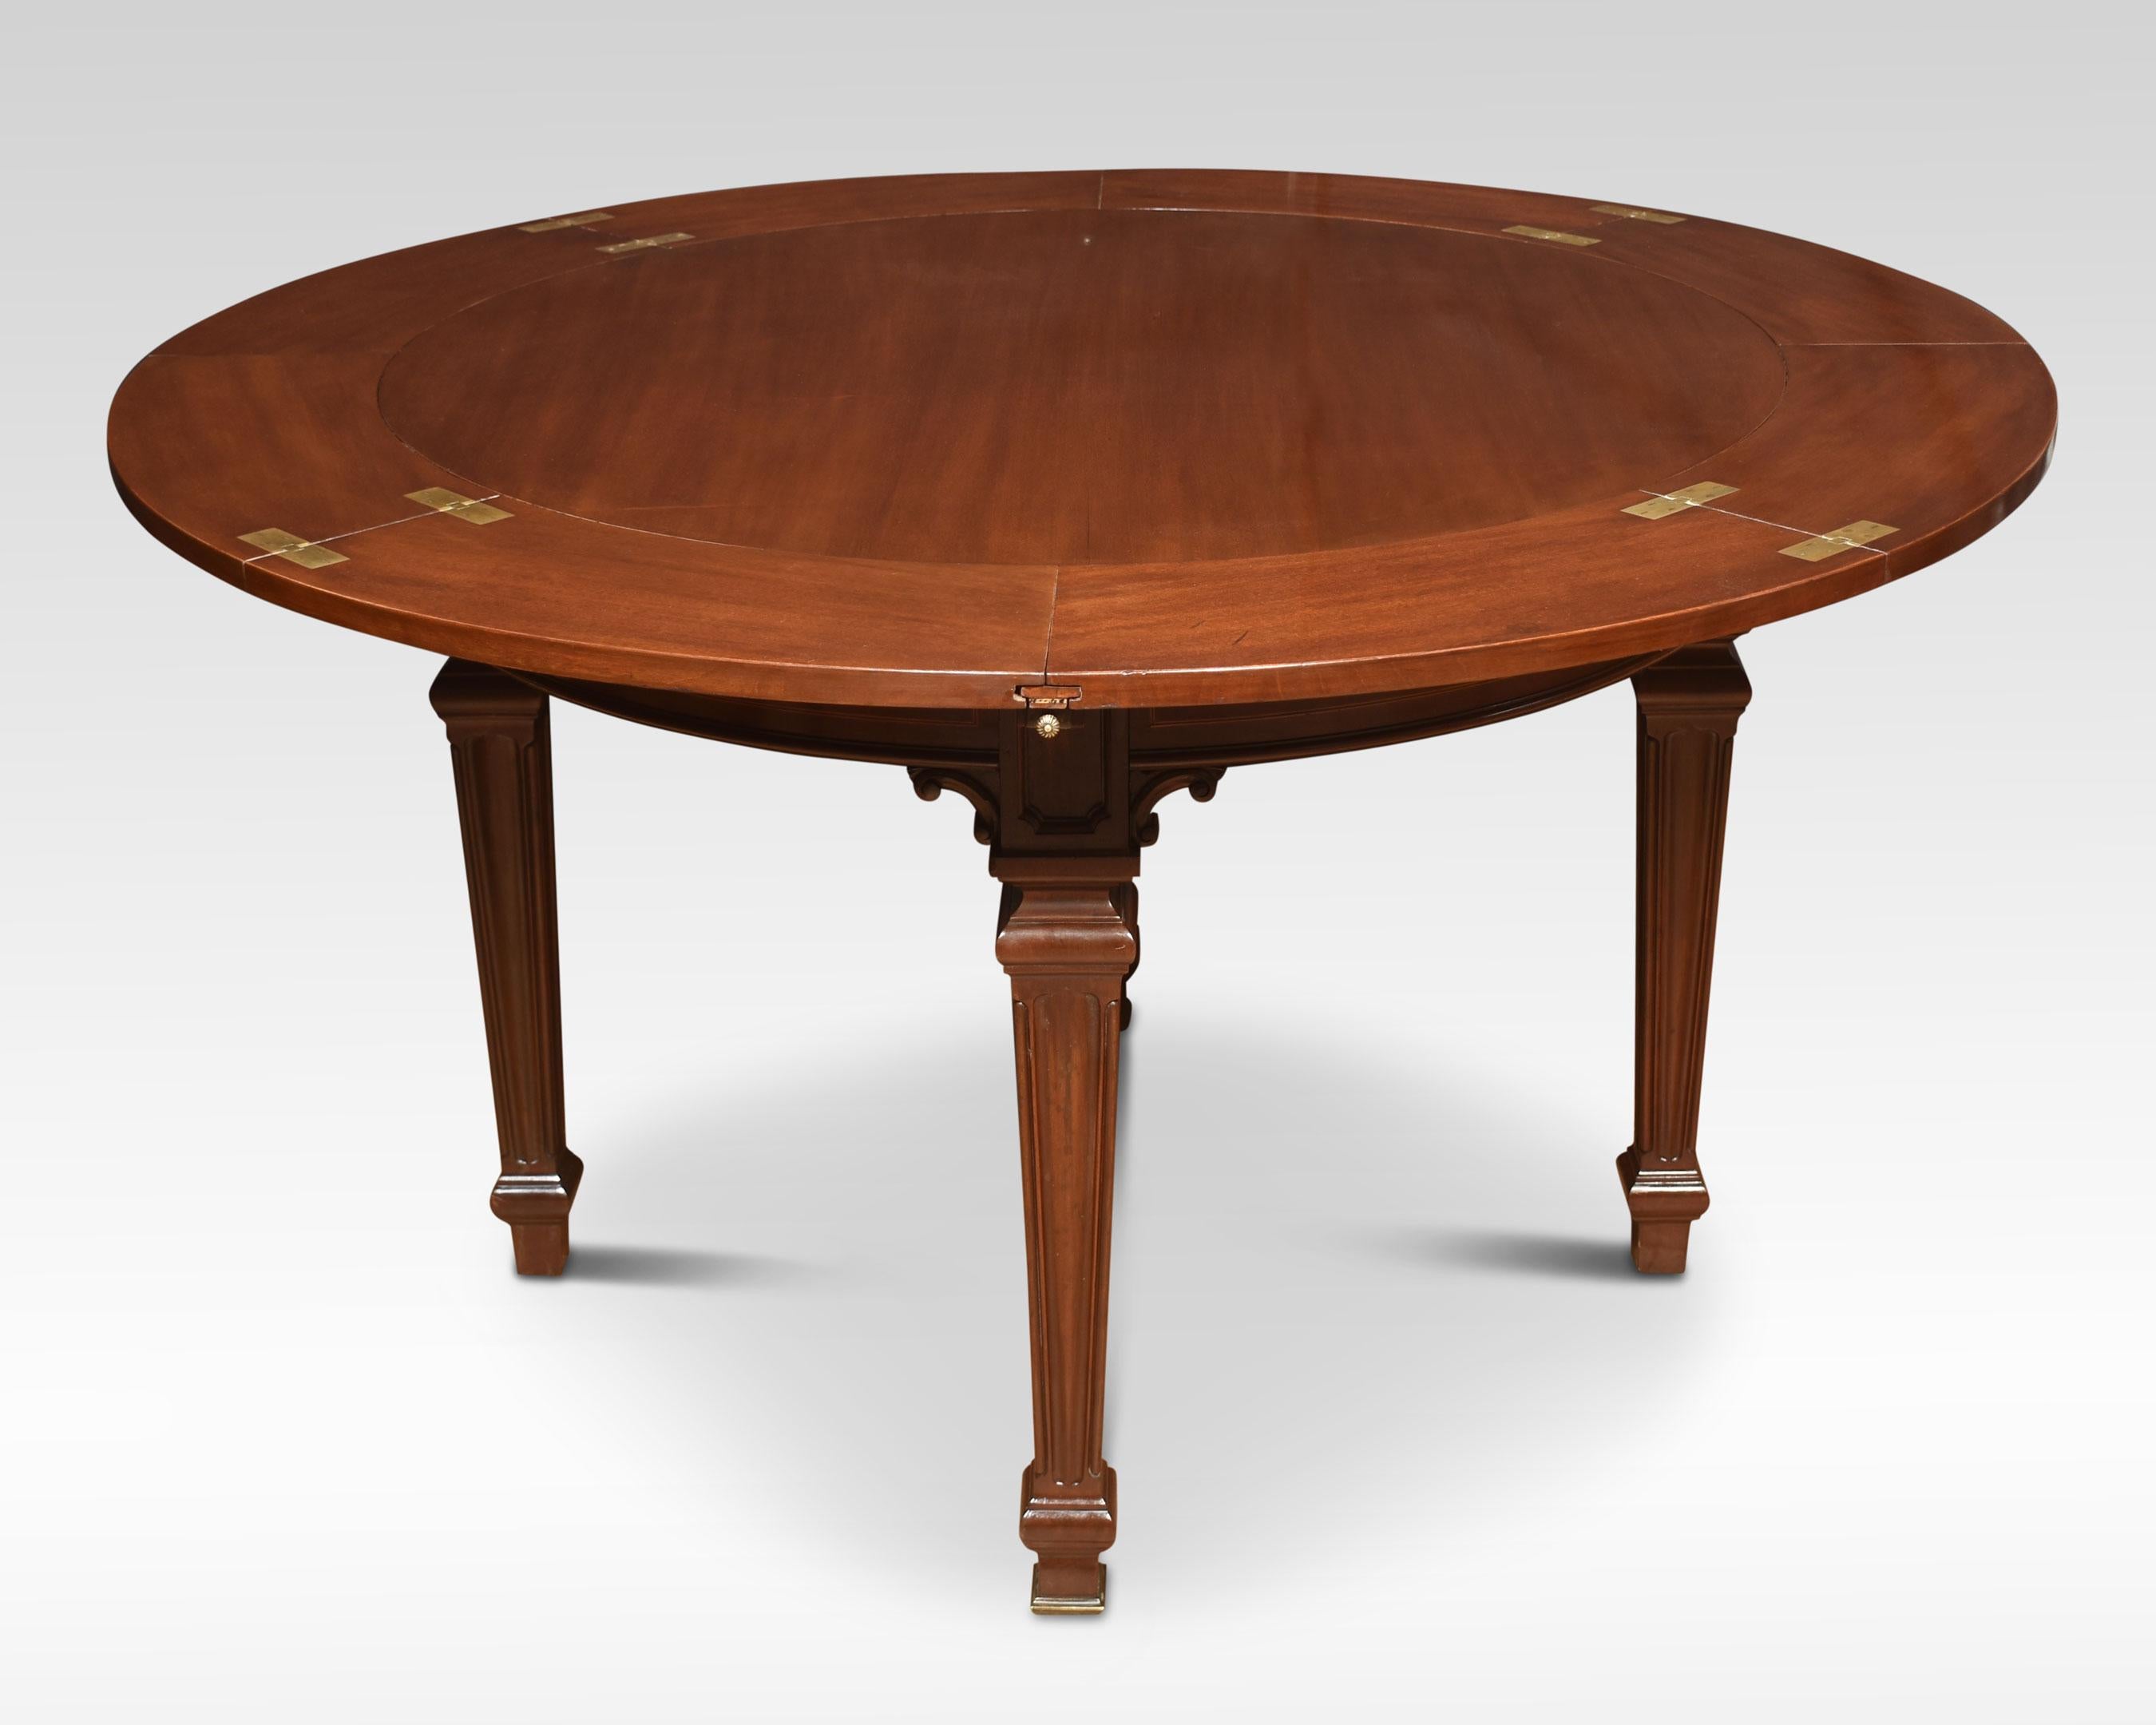 Mahogany inlaid ships dining table, the unusual circular top having four convexed drawers which open to reveal four original mahogany hinged leaves which can be incorporated into the pull-out arms to create a large circular dining surface. Raised up